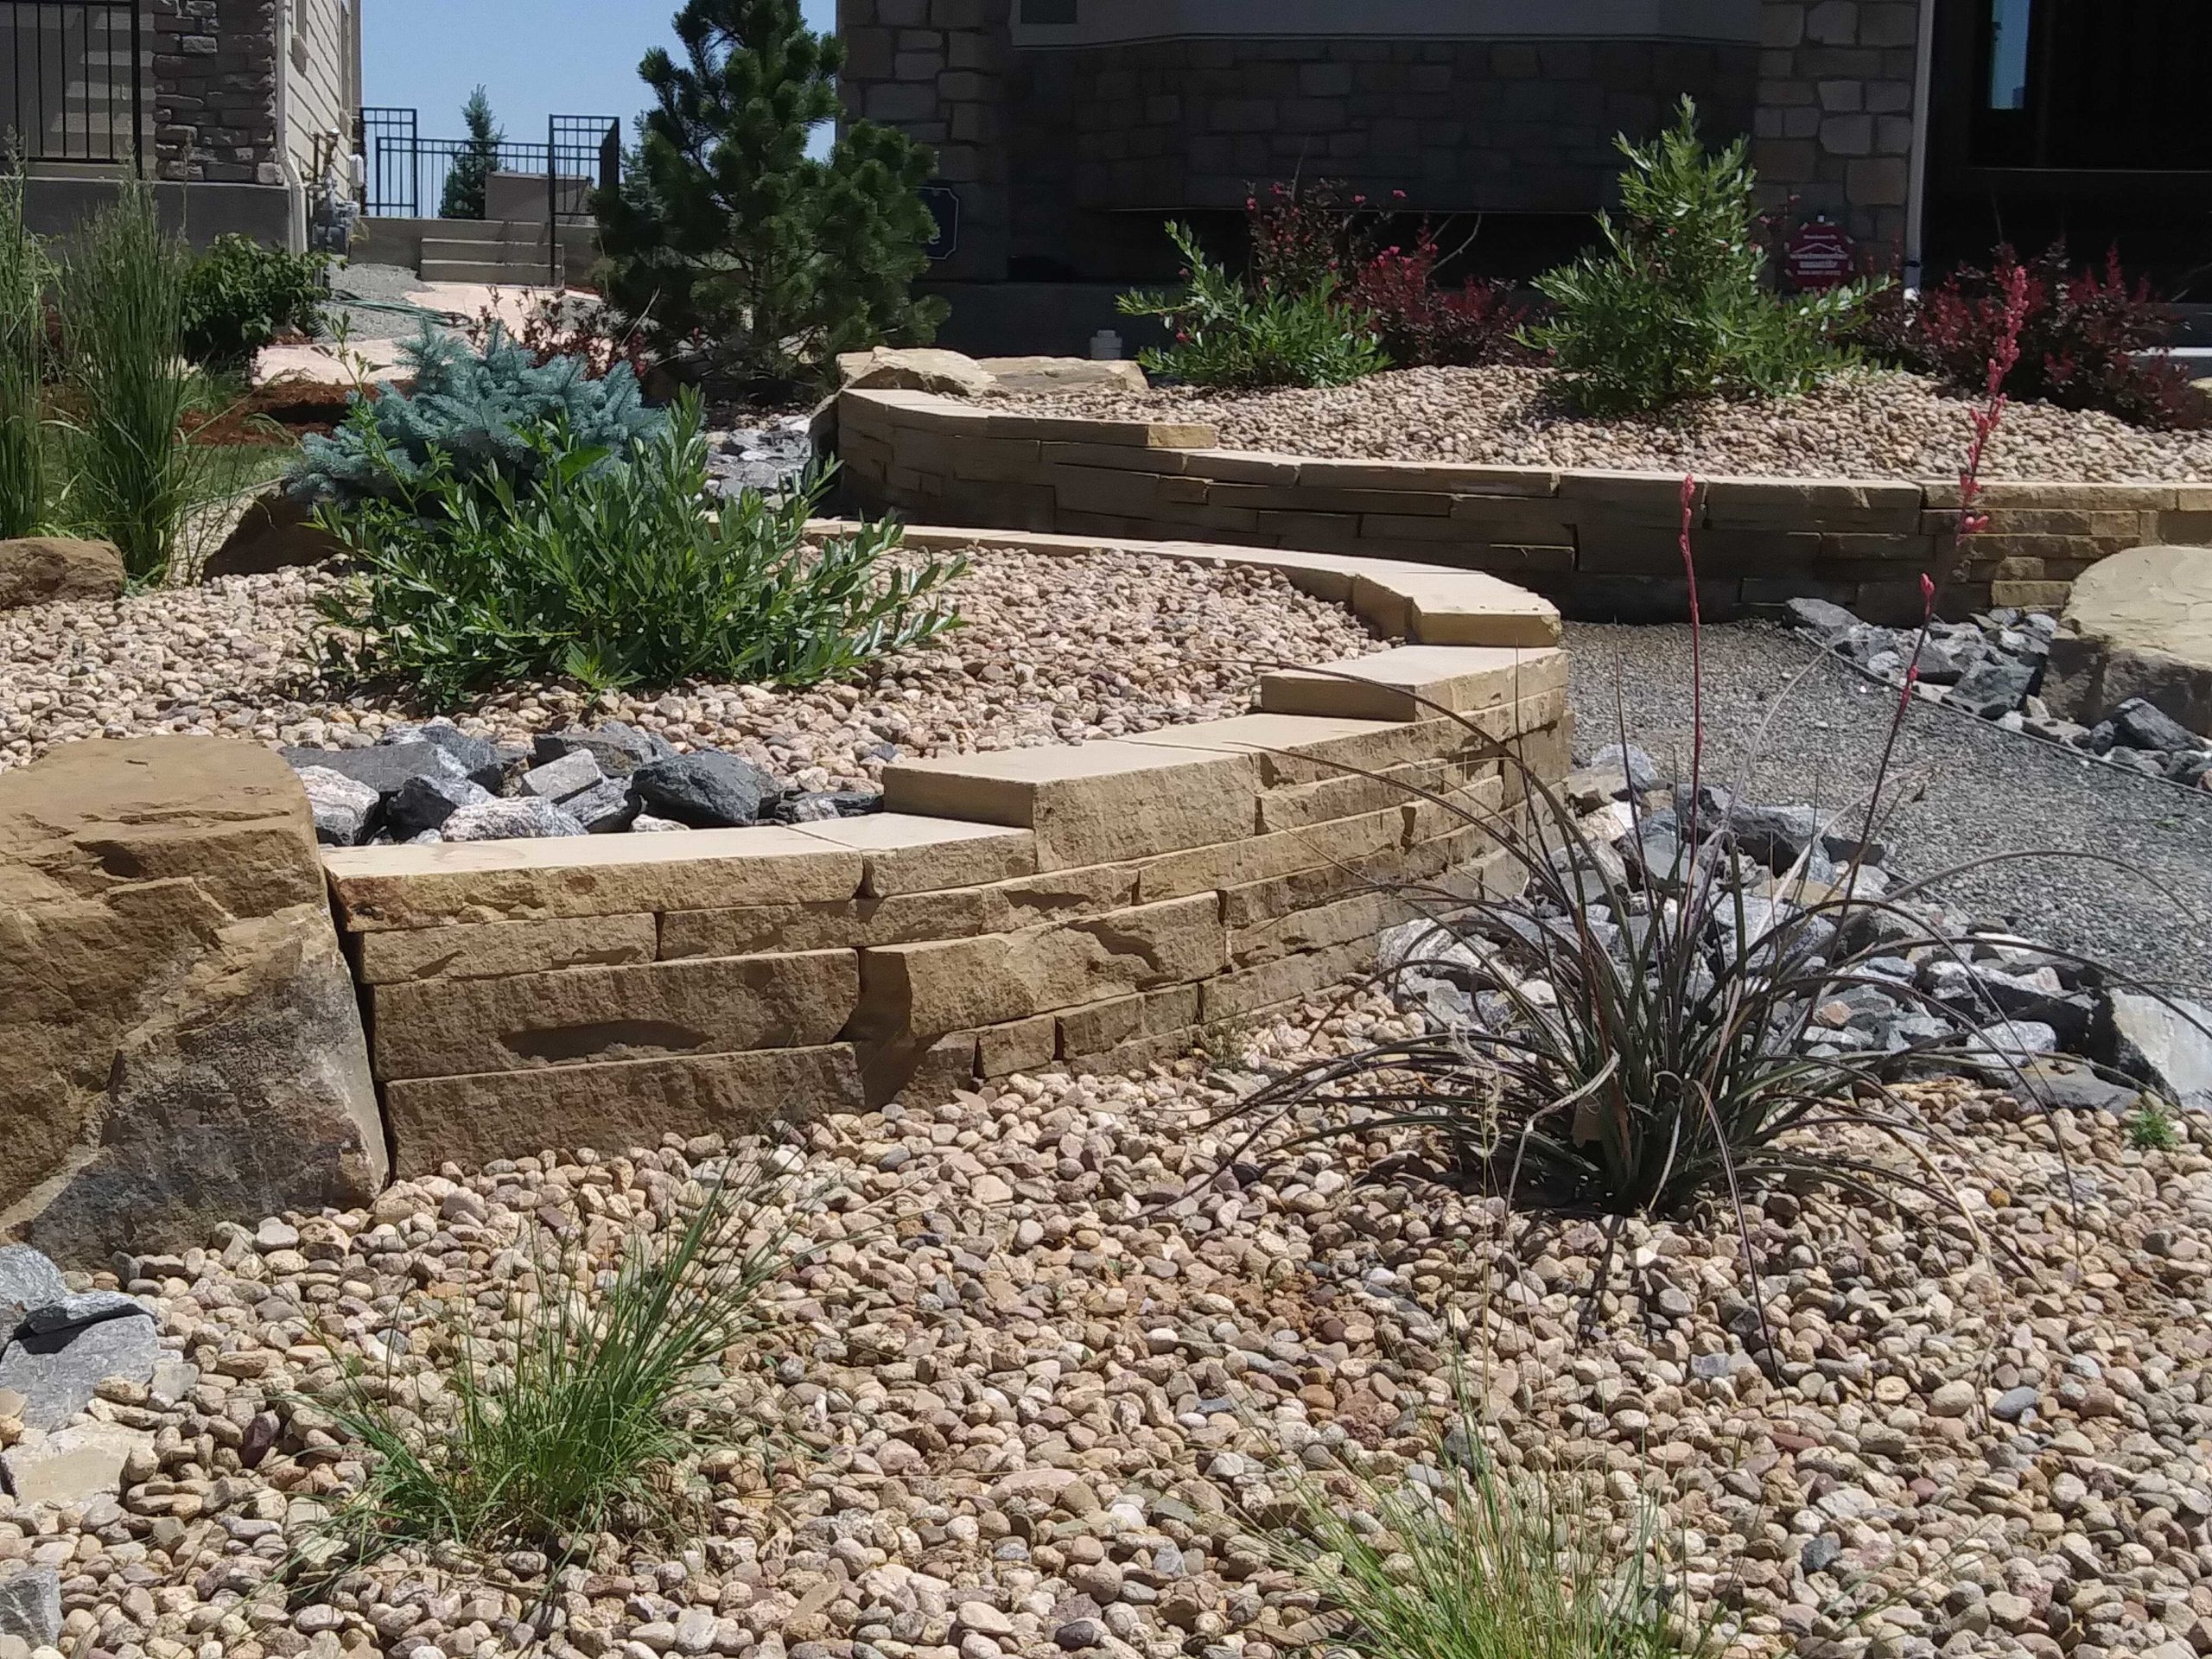 Gravel path between xeriscaped raised beds.